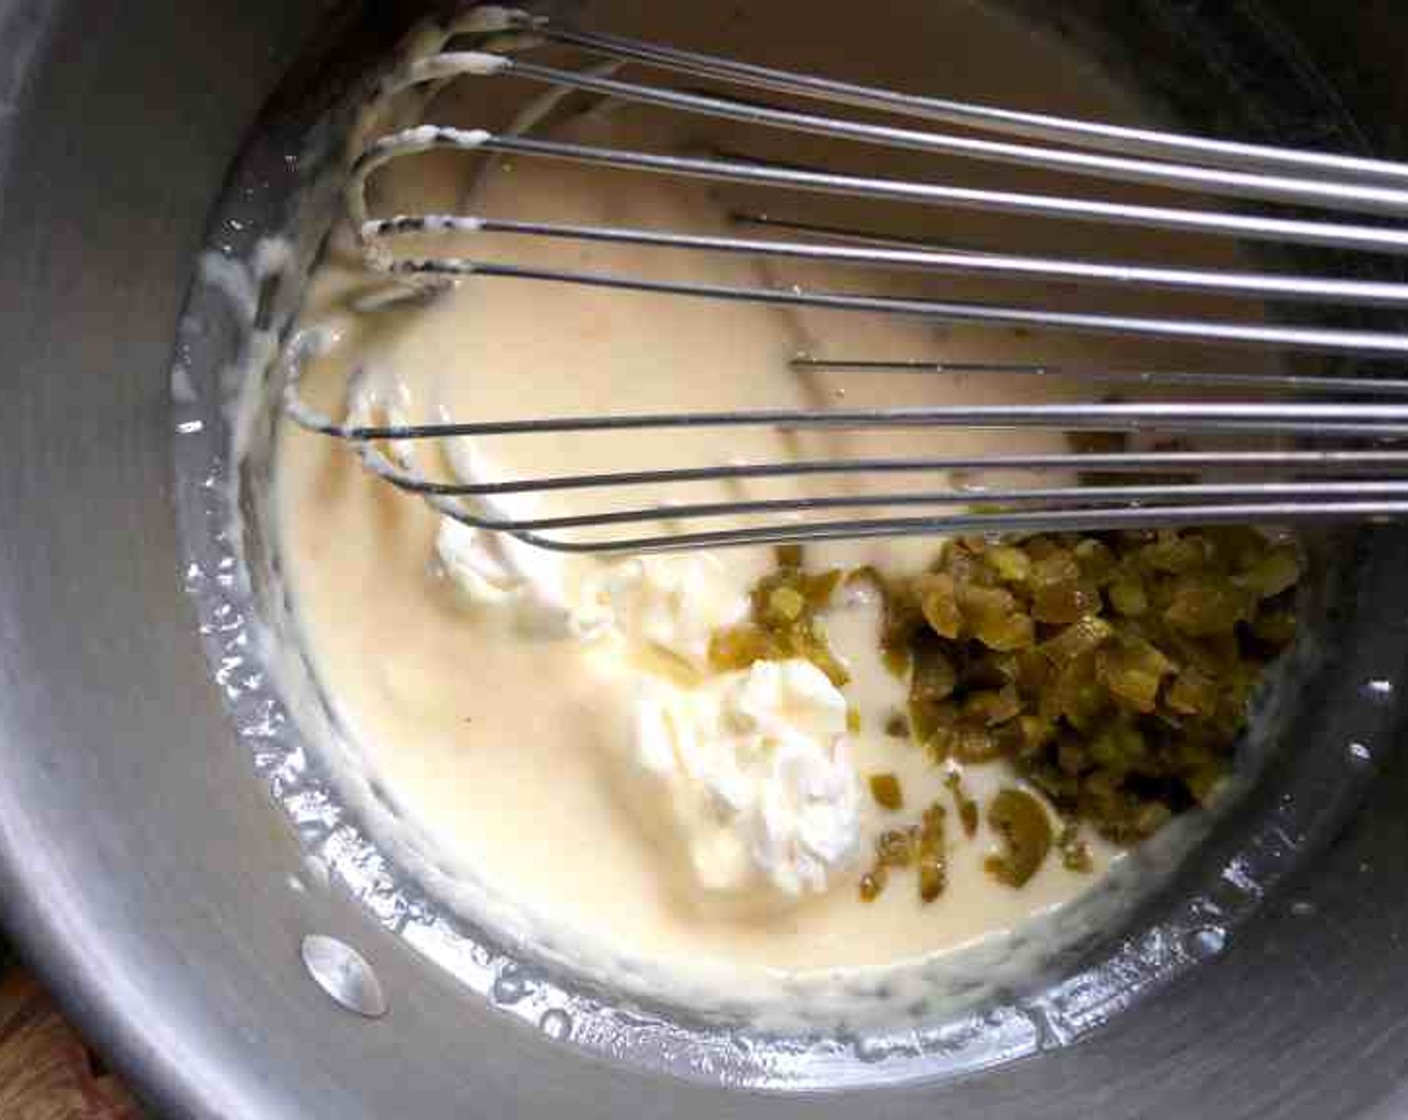 step 7 Whisk together the Pepper Jack Cheese (1 packet) and Evaporated Milk (1/2 cup) in the top of a double boiler over simmering water. Whisk until smooth for 3 to 4 minutes. Remove from heat, stir in the Cream Cheese (4 Tbsp) and Pickled Jalapeño Pepper (1/4 cup).